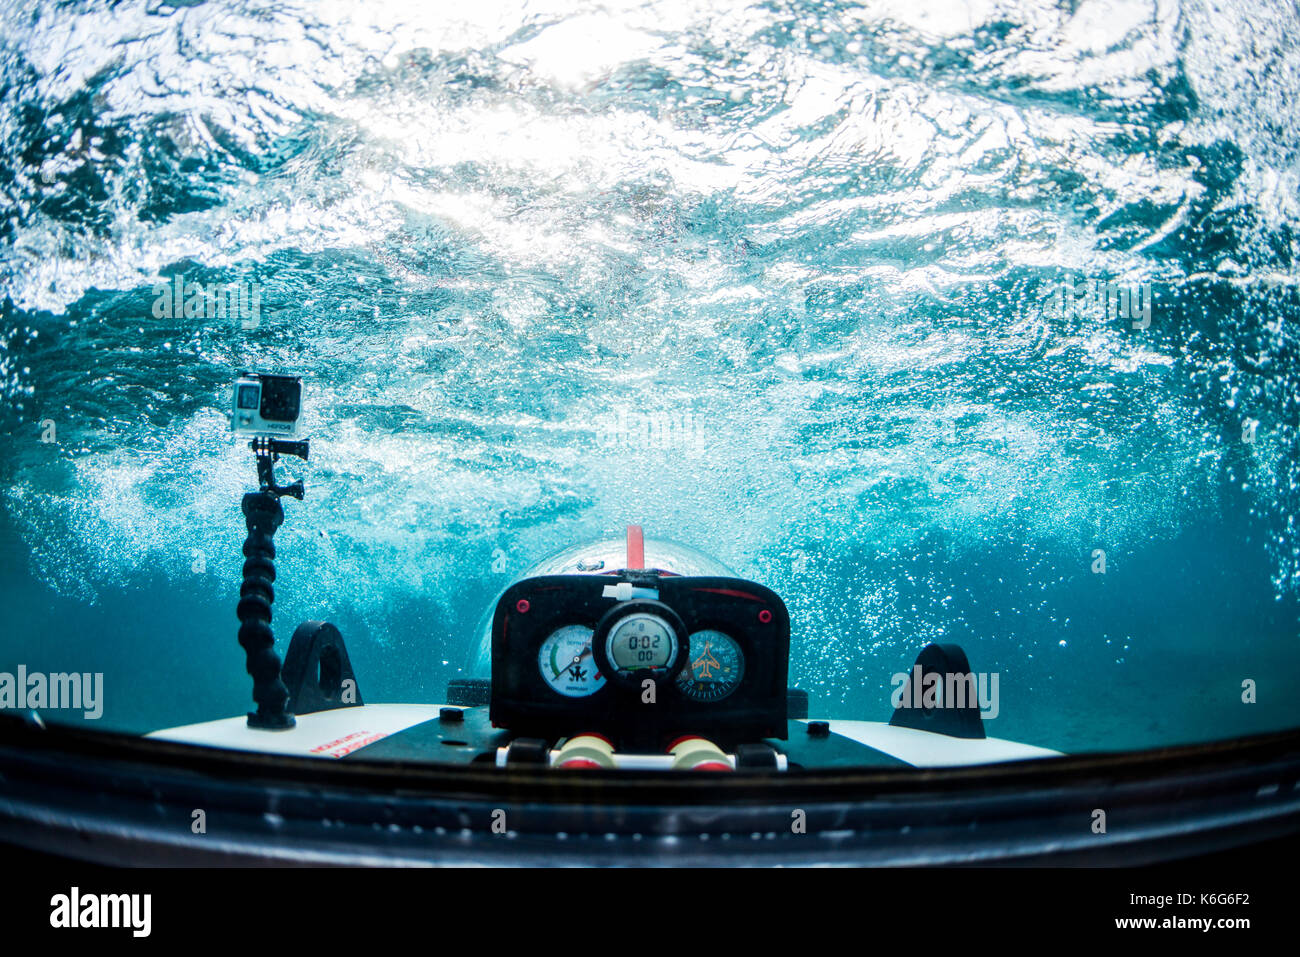 Underwater view from rear cockpit of personal submarine, Lake Tahoe, California, USA Stock Photo